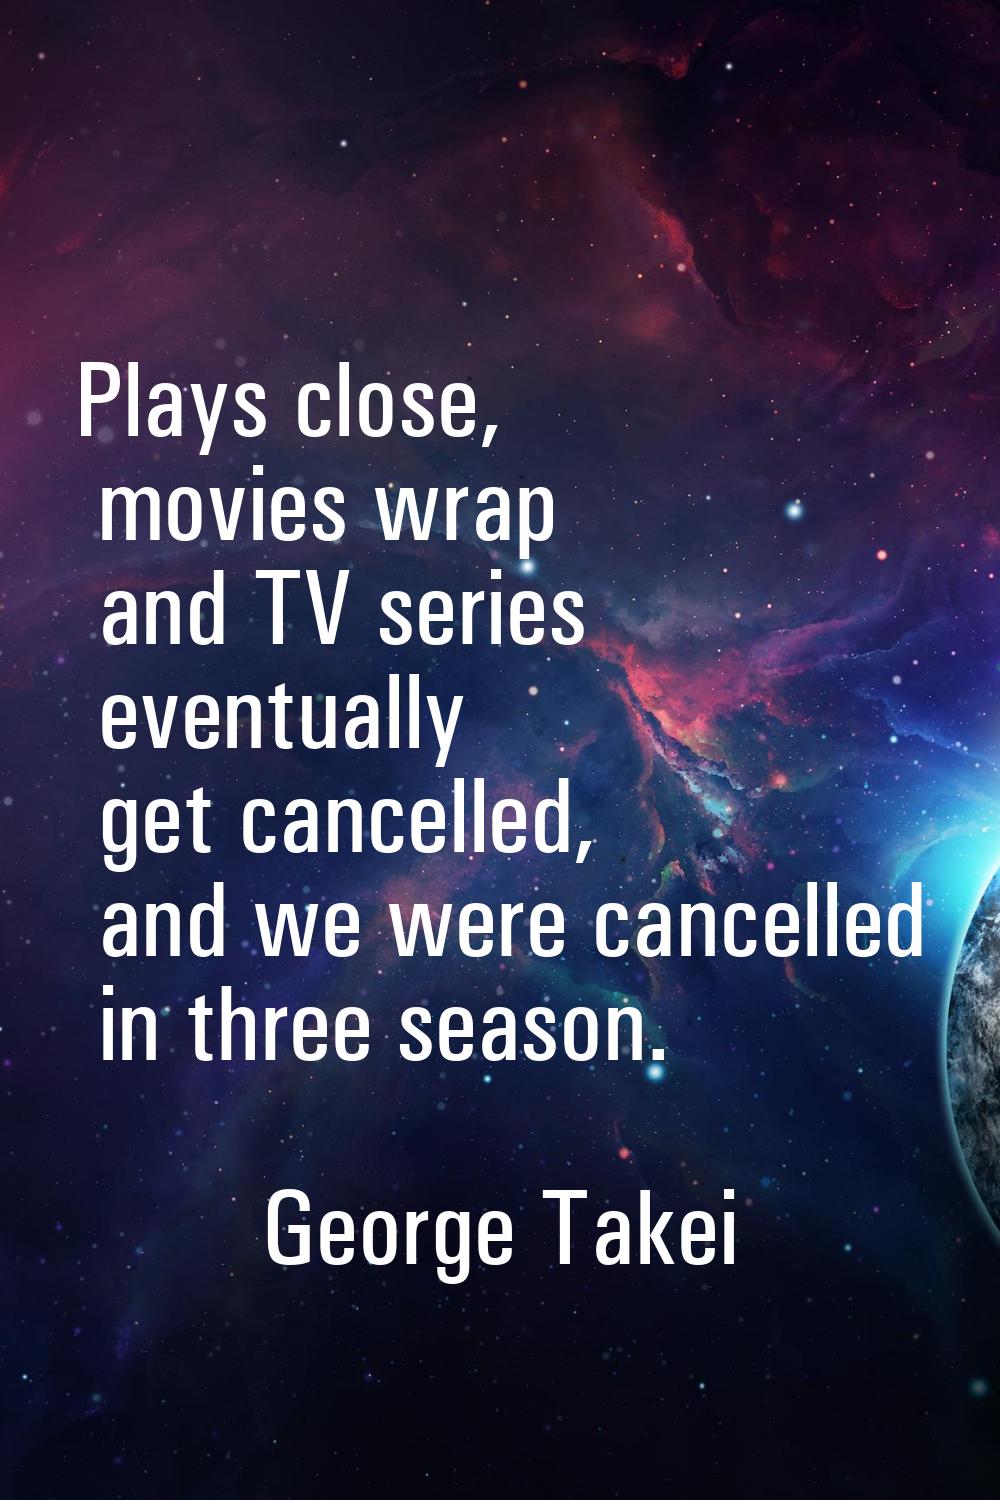 Plays close, movies wrap and TV series eventually get cancelled, and we were cancelled in three sea